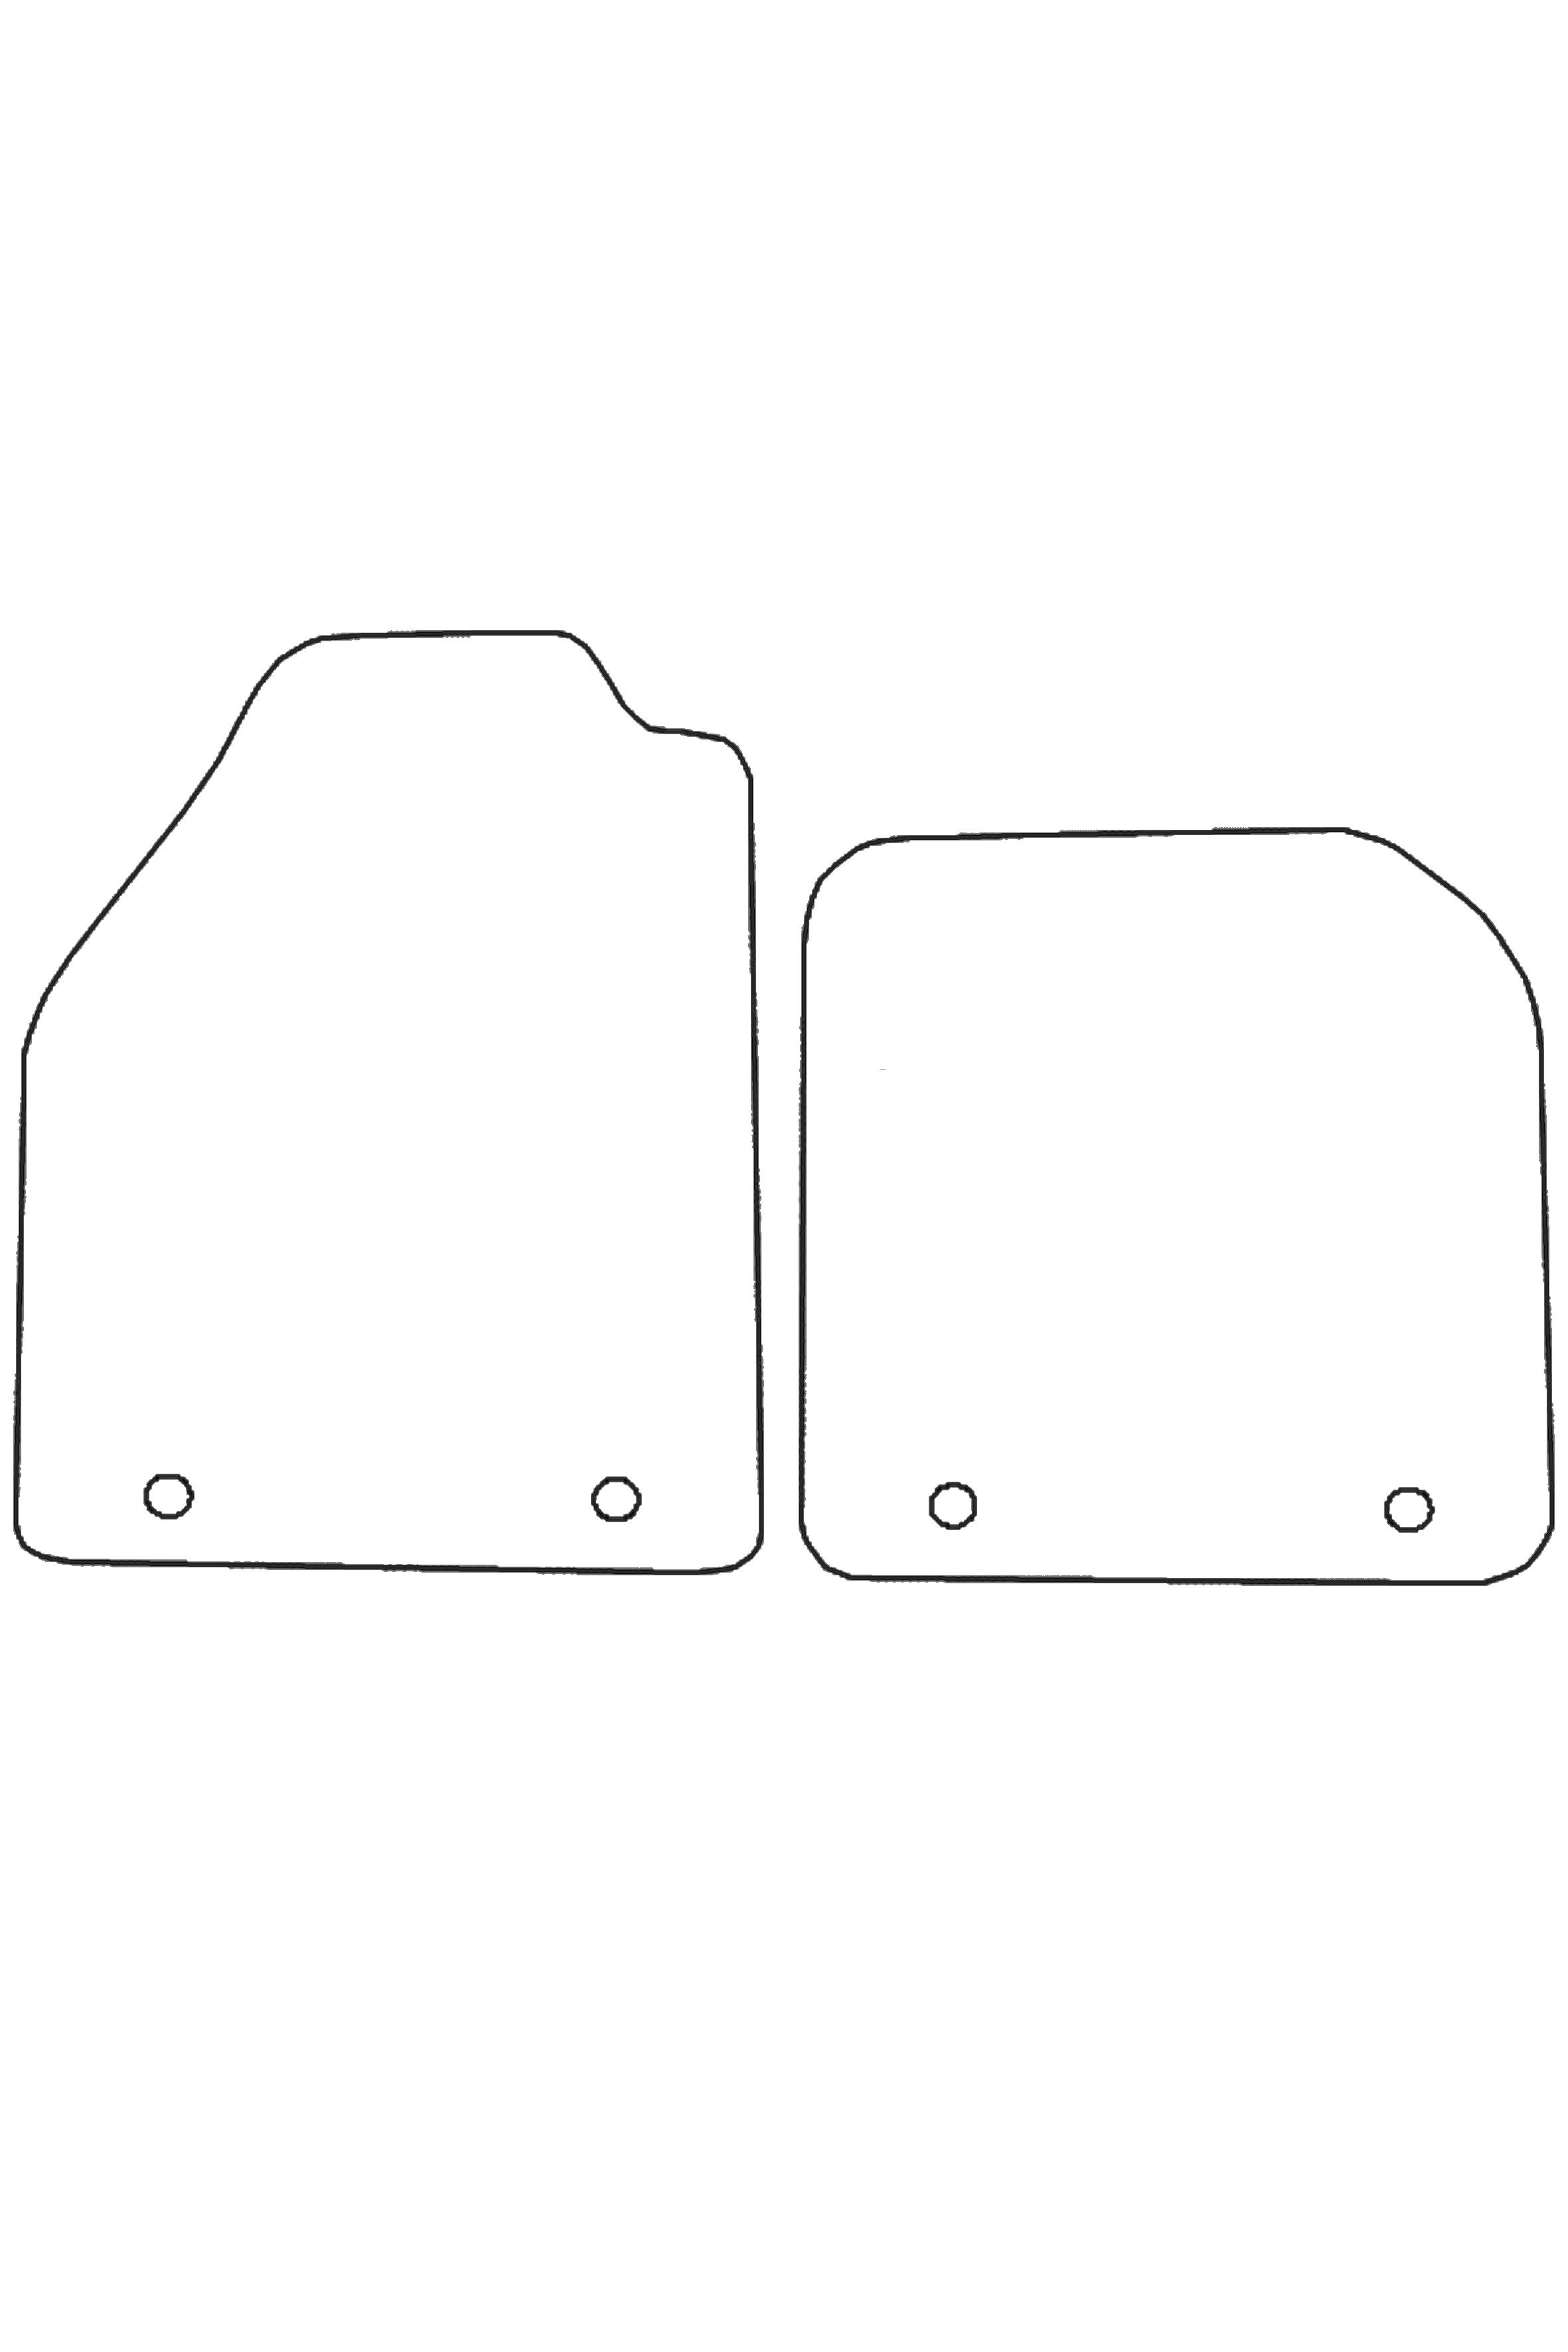 Ford Connect 2002-2014 Tailored Front Rubber Mats